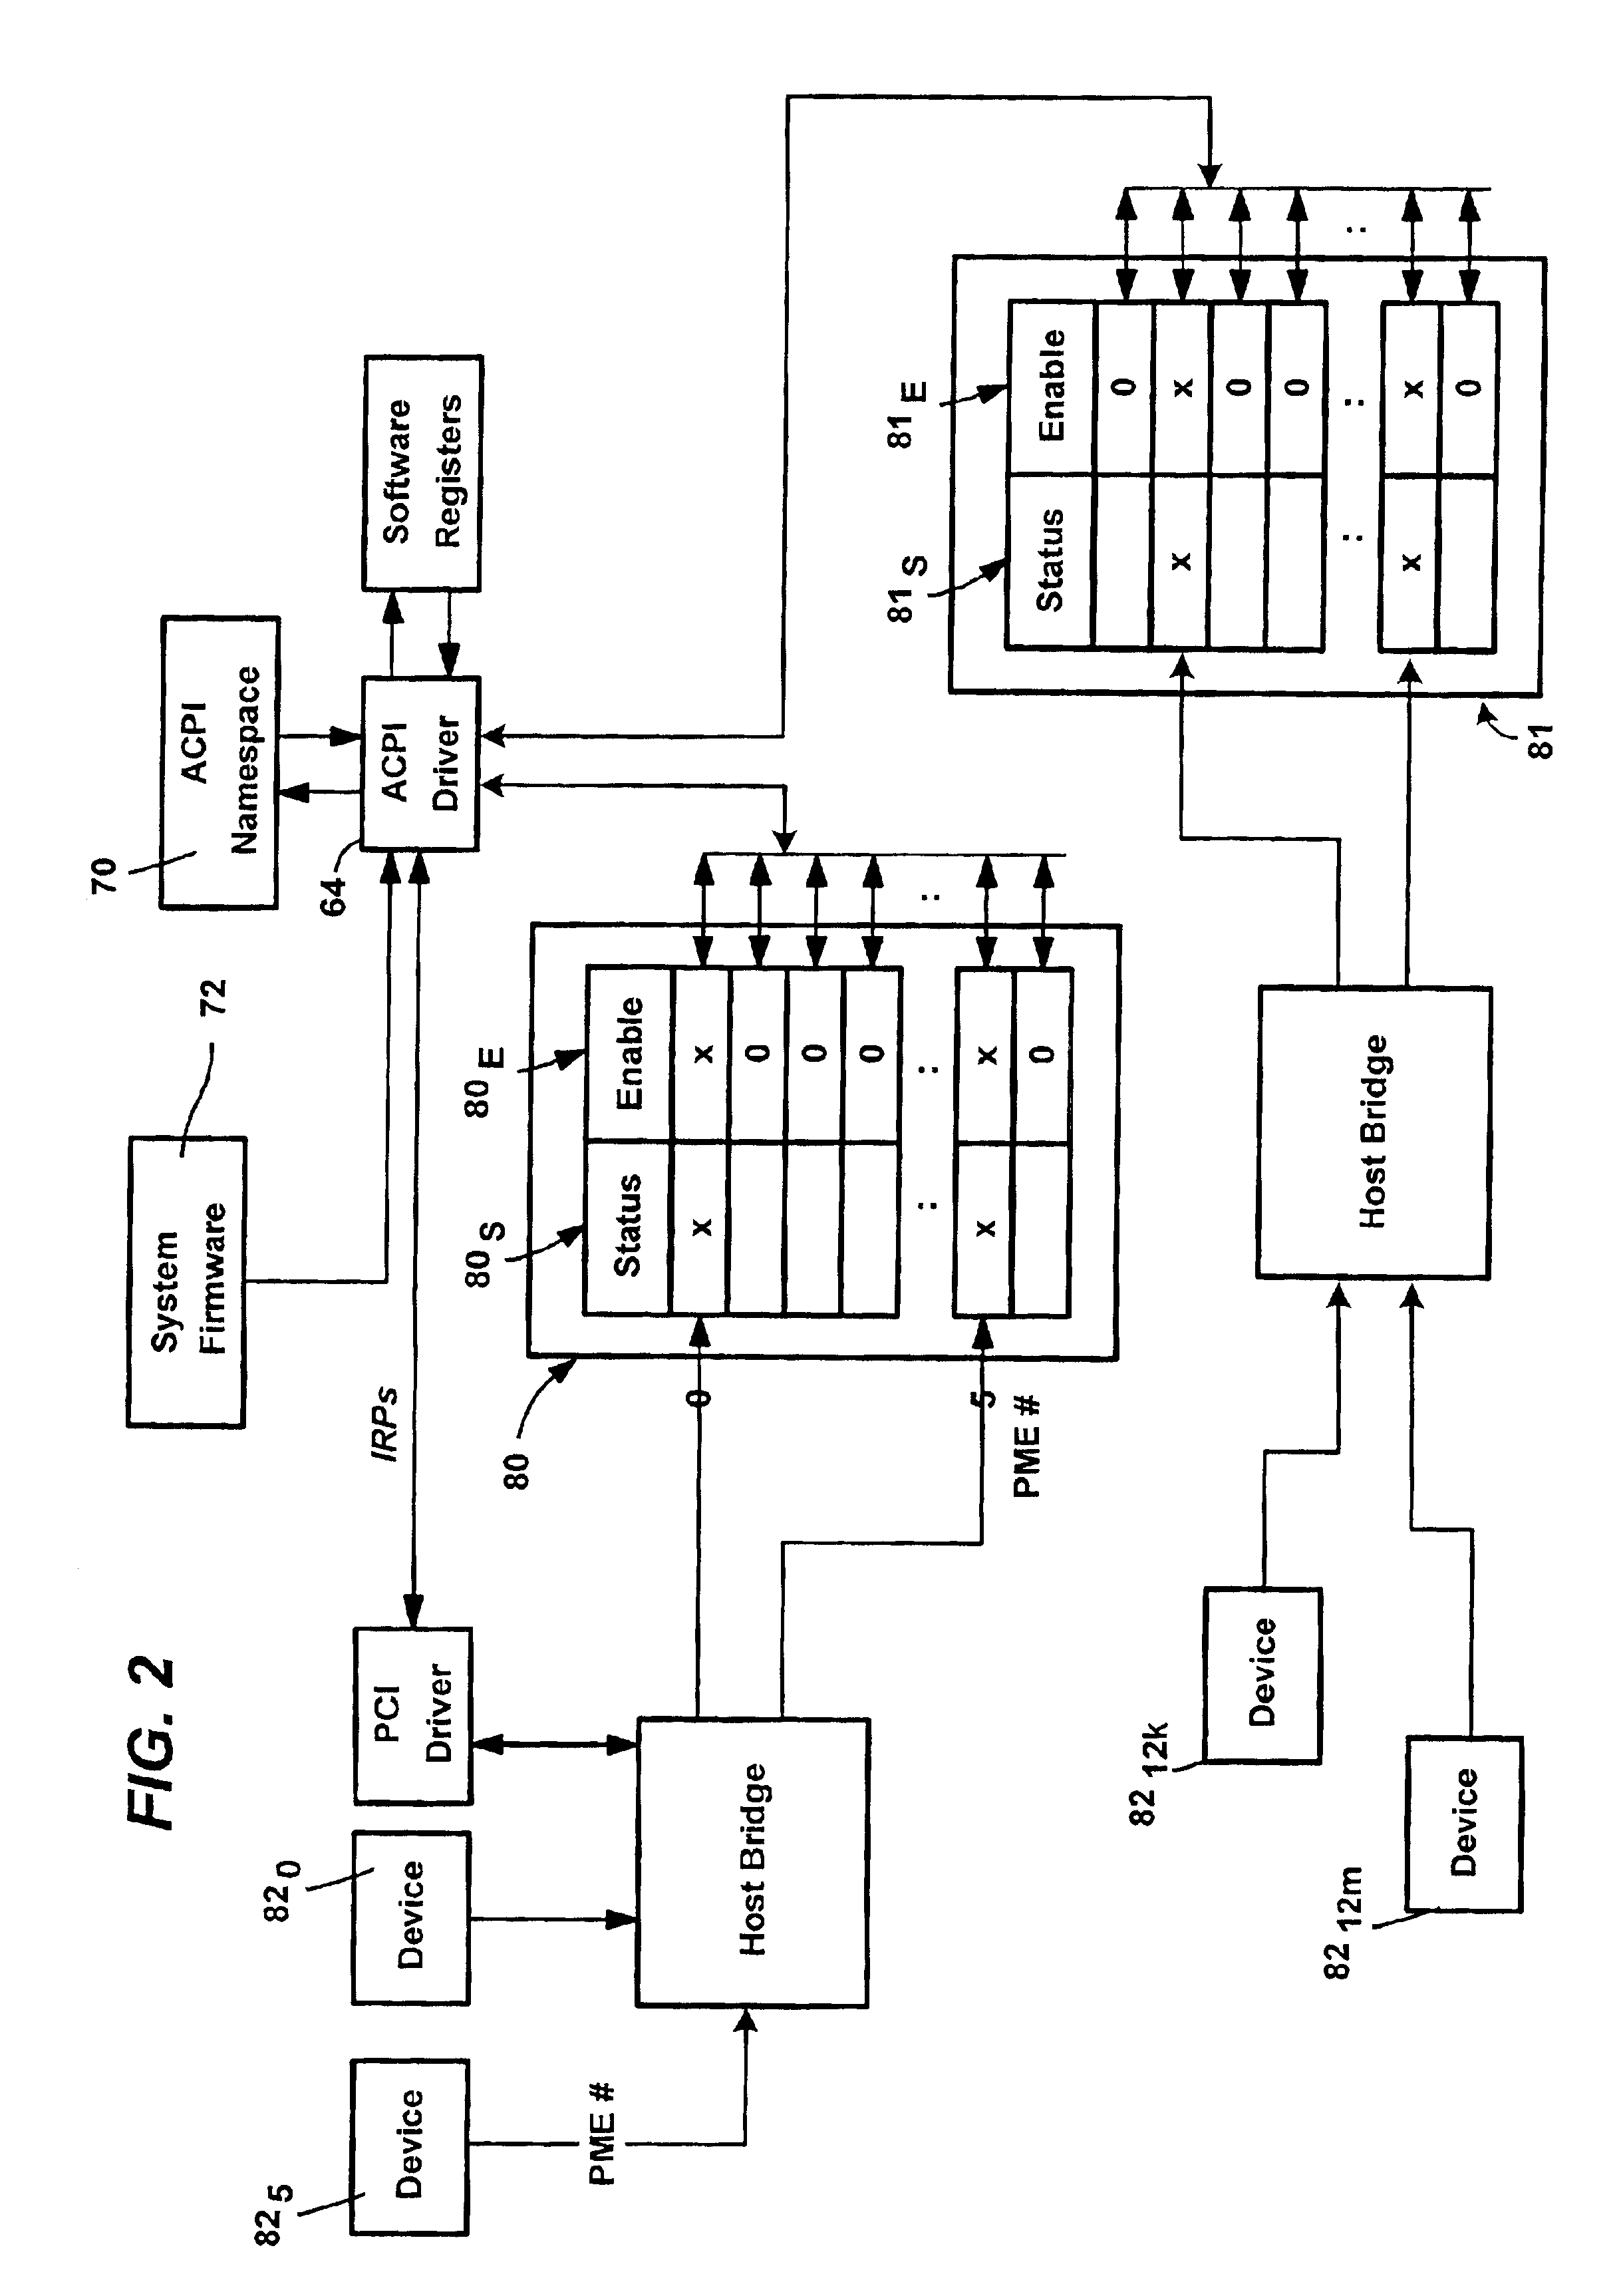 System and method for adding hardware registers to a power management and configuration system